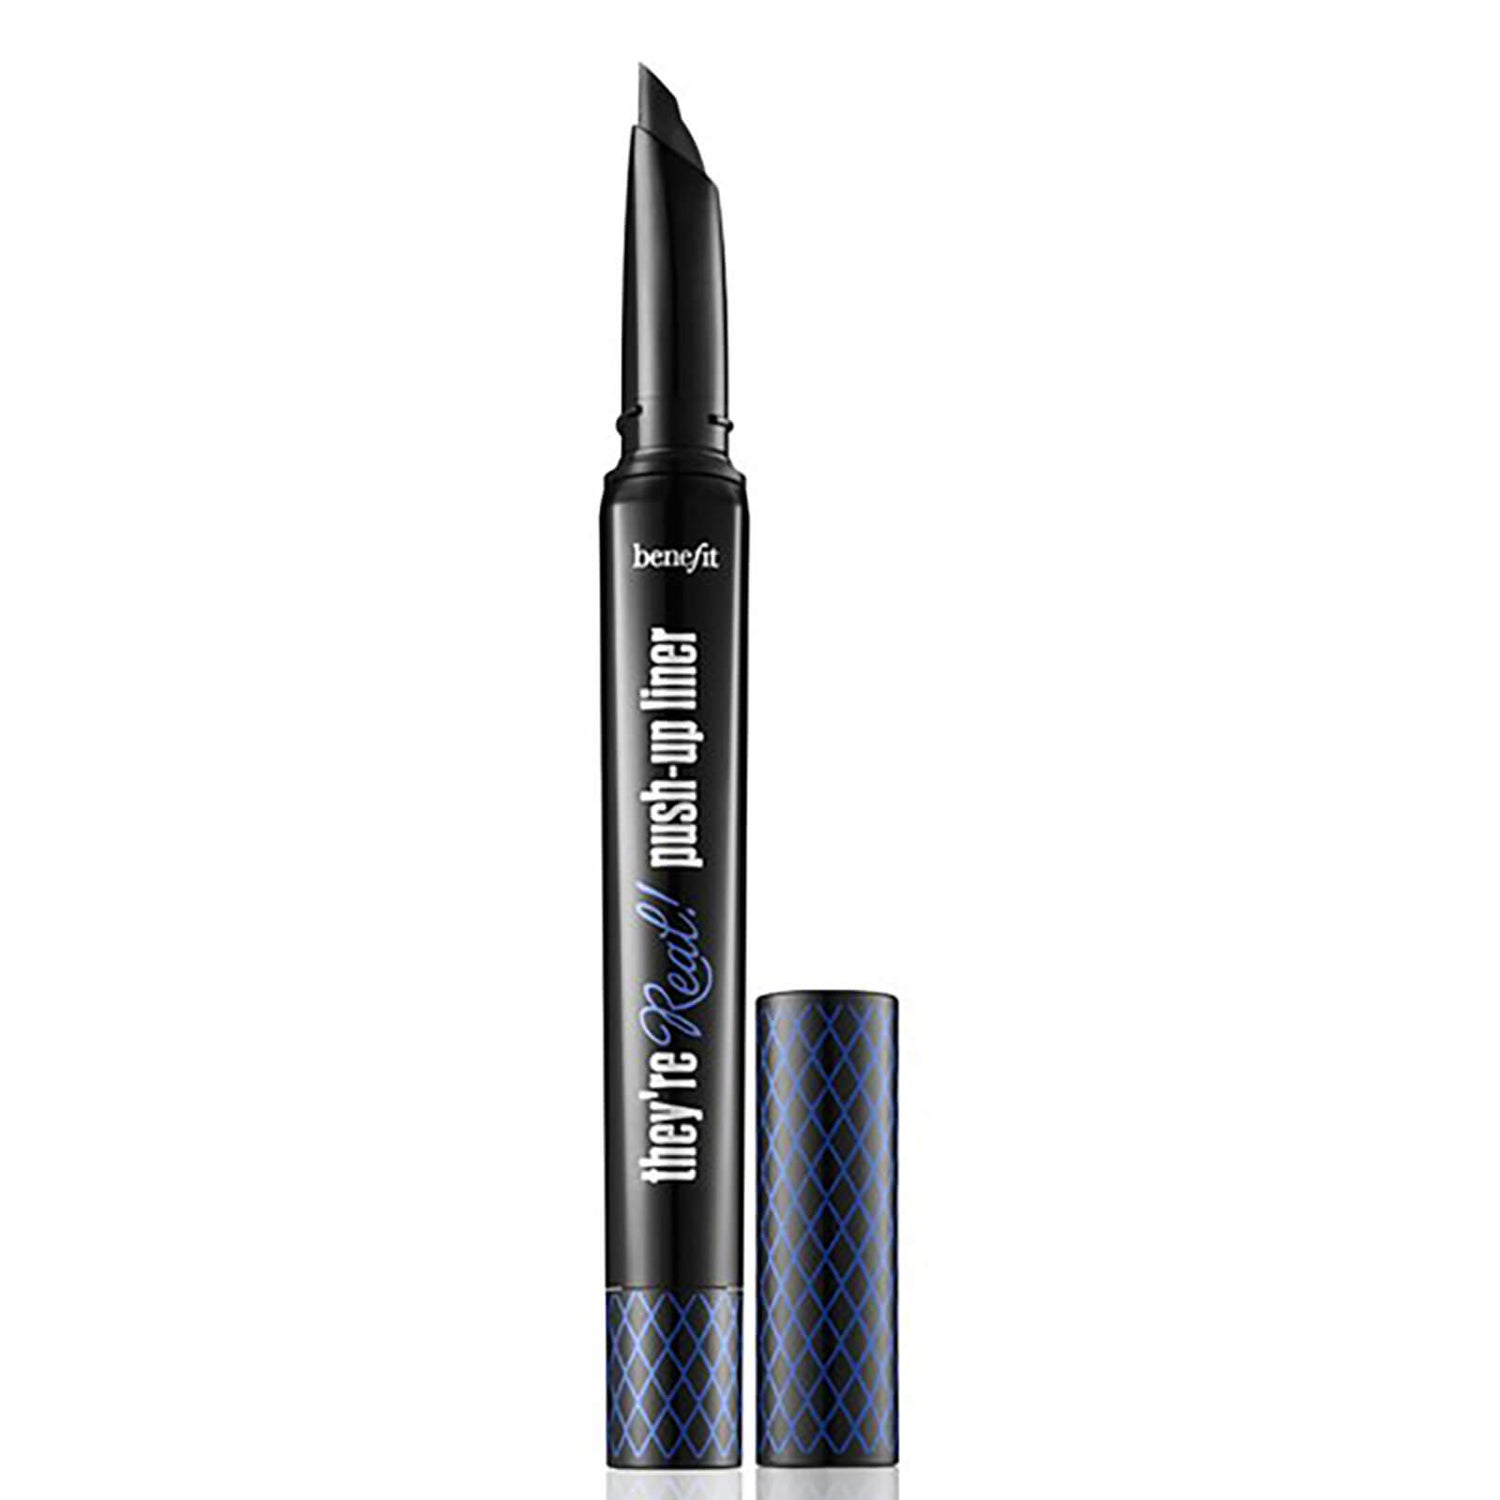 benefit They're Real Push-up Gel Eyeliner Blue